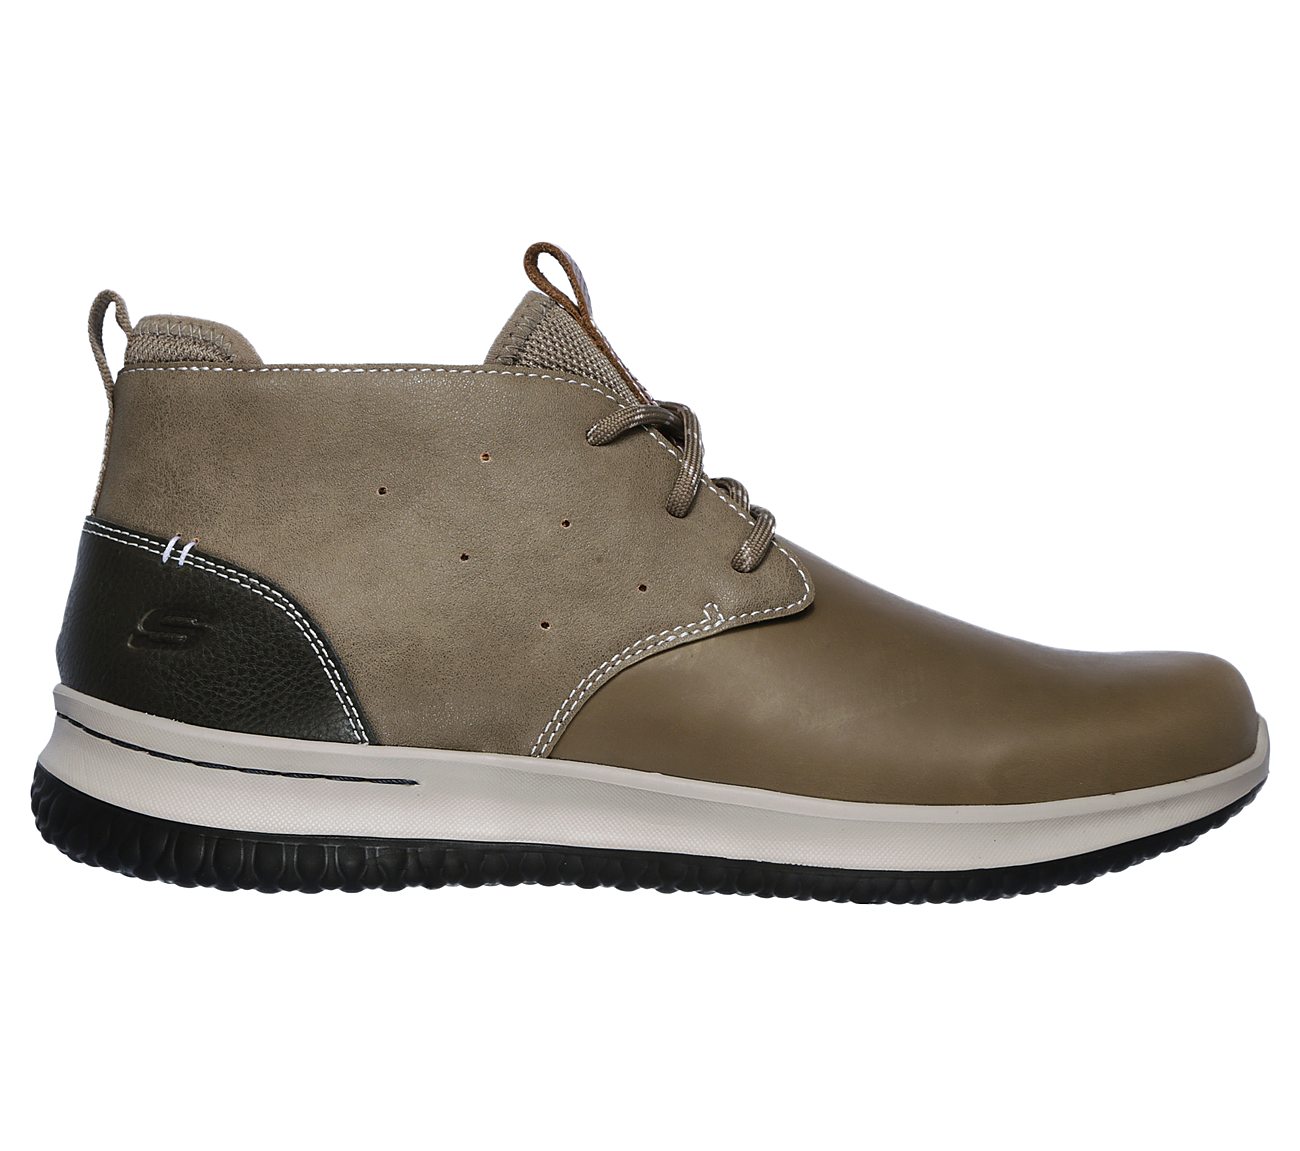 SKECHERS Delson - Clenton USA Casuals Shoes